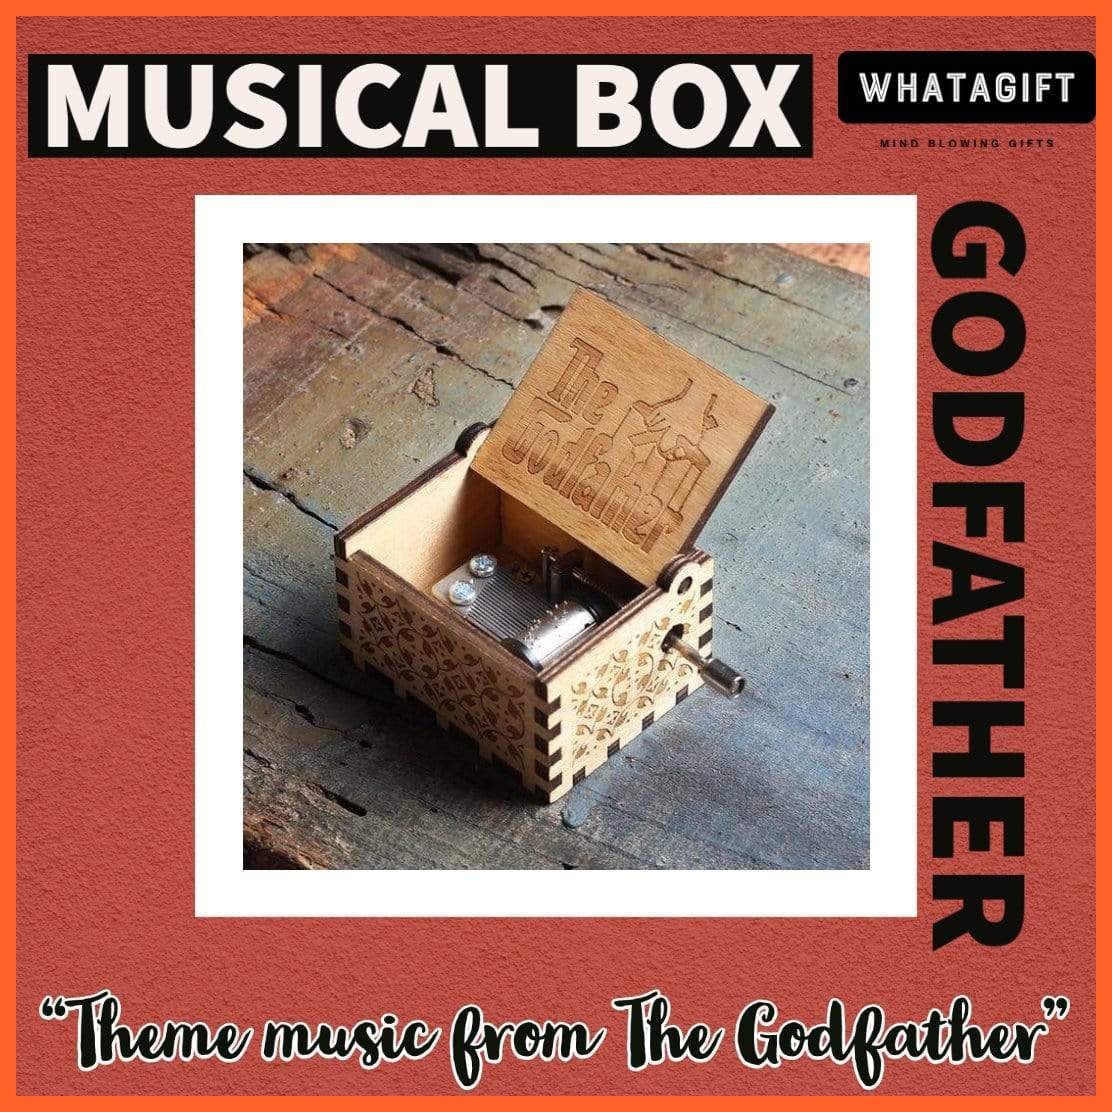 Wooden Classical Music Box The Godfather Tune | whatagift.com.au.